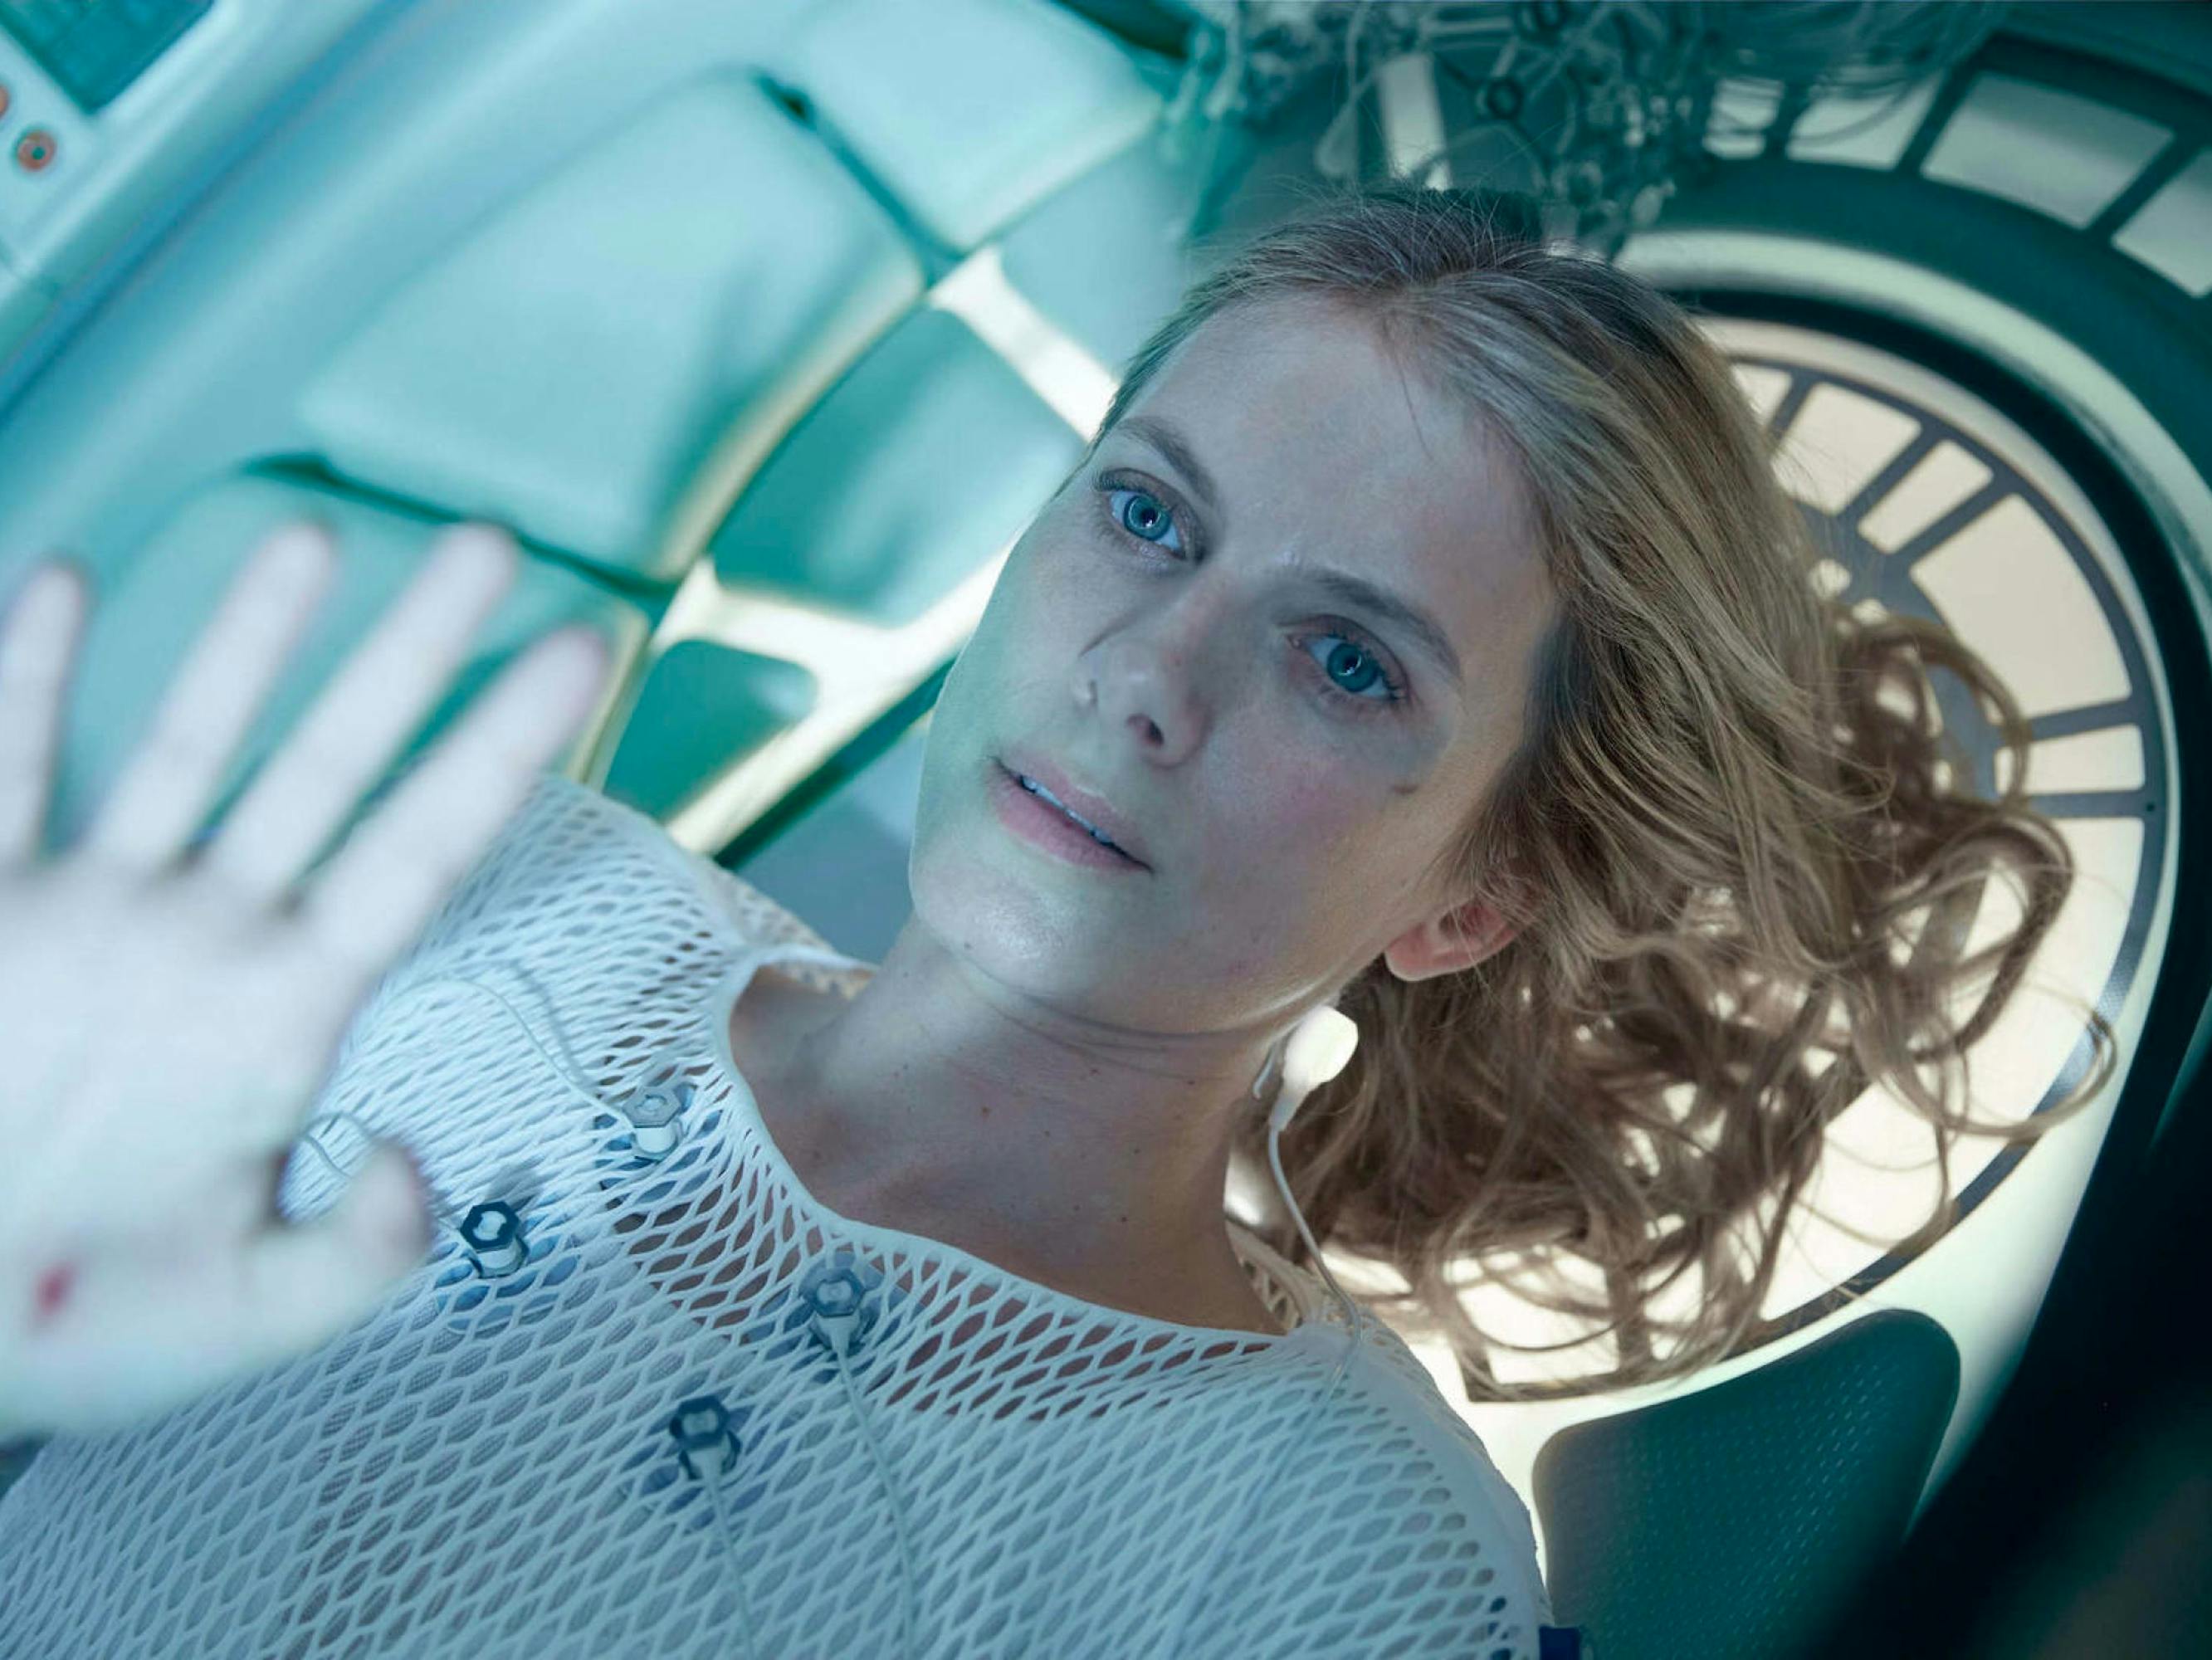 Laurent lies in her cryogenic chamber, hand pressed against the top giving a sense of how small the space is. She wears a white mesh top with some medical cords attached to her front. The chamber resembles a spaceship.